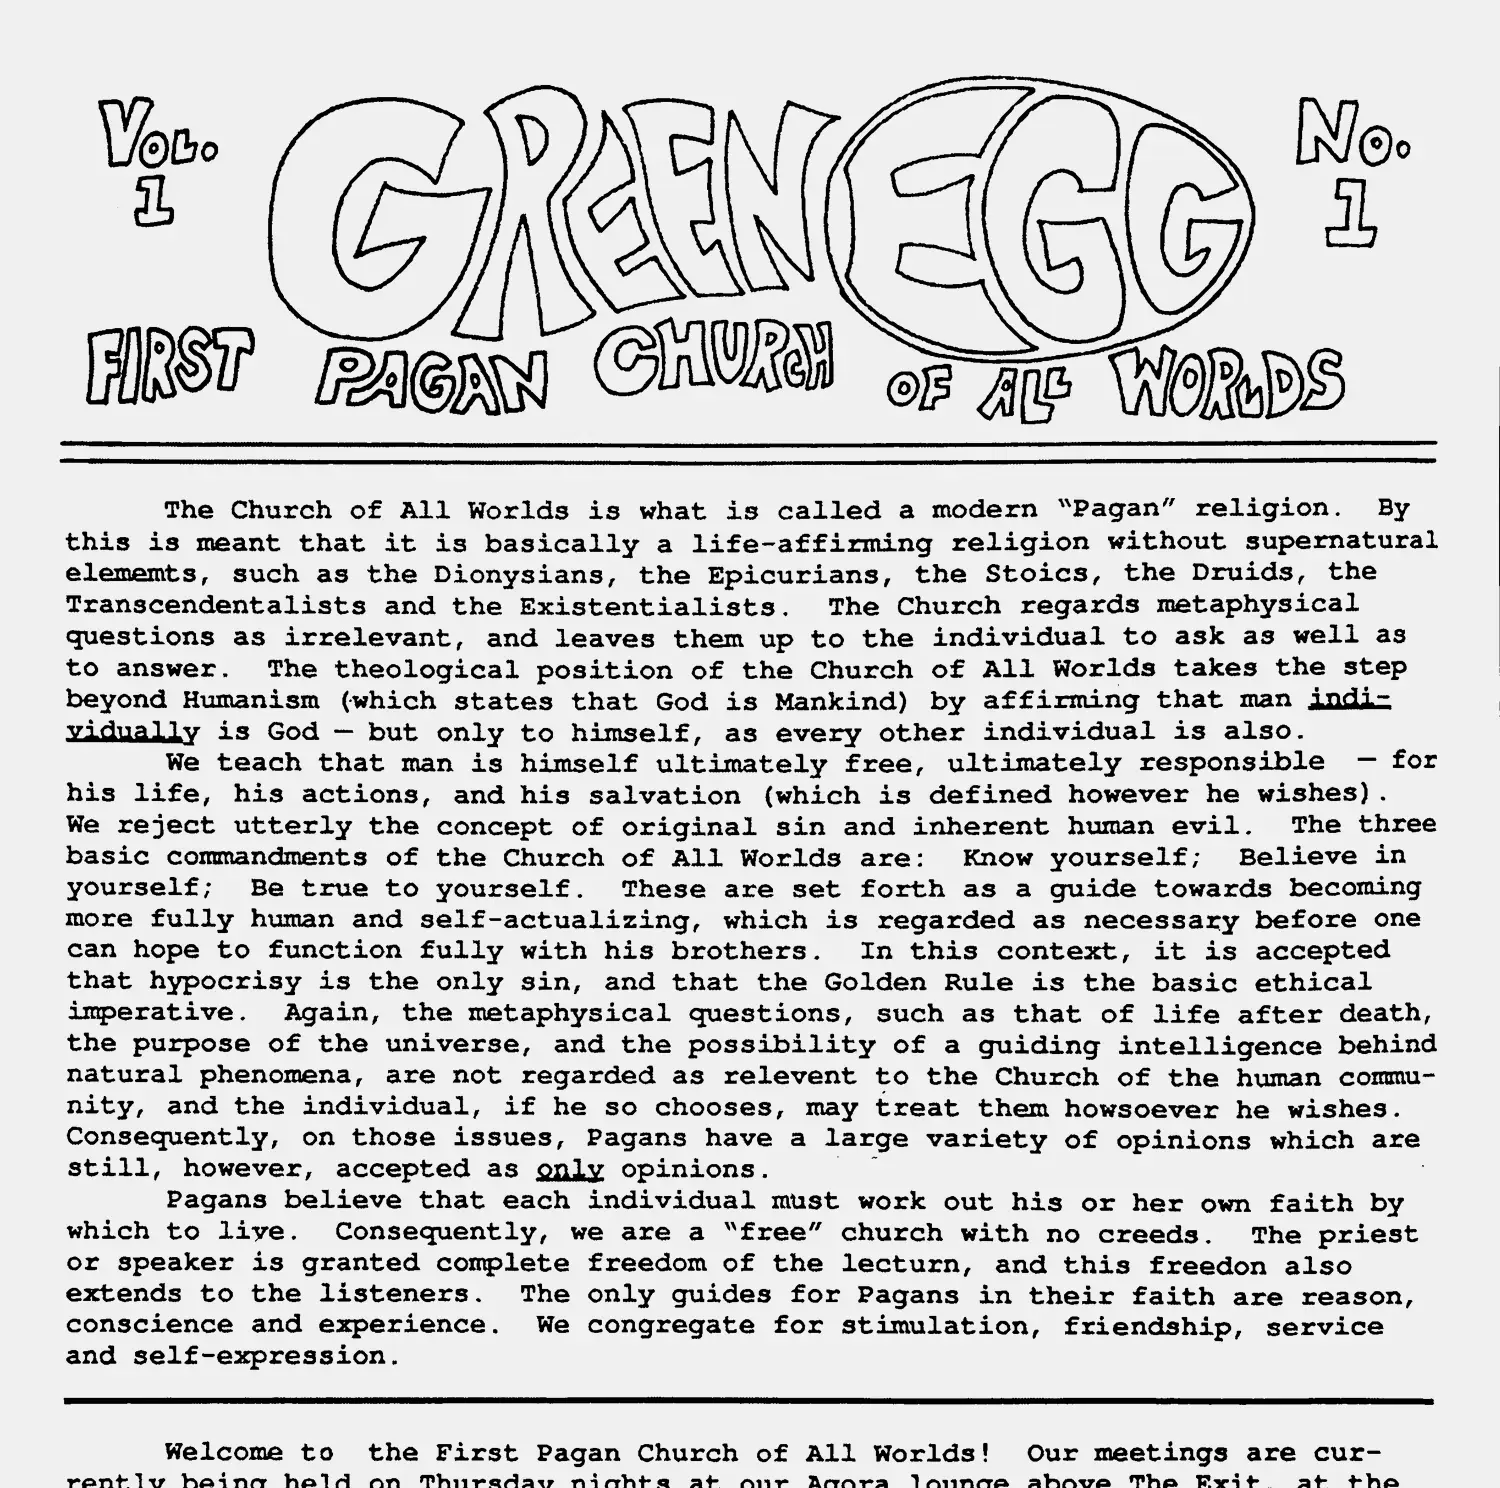 A scan from the first issue of Green Egg.